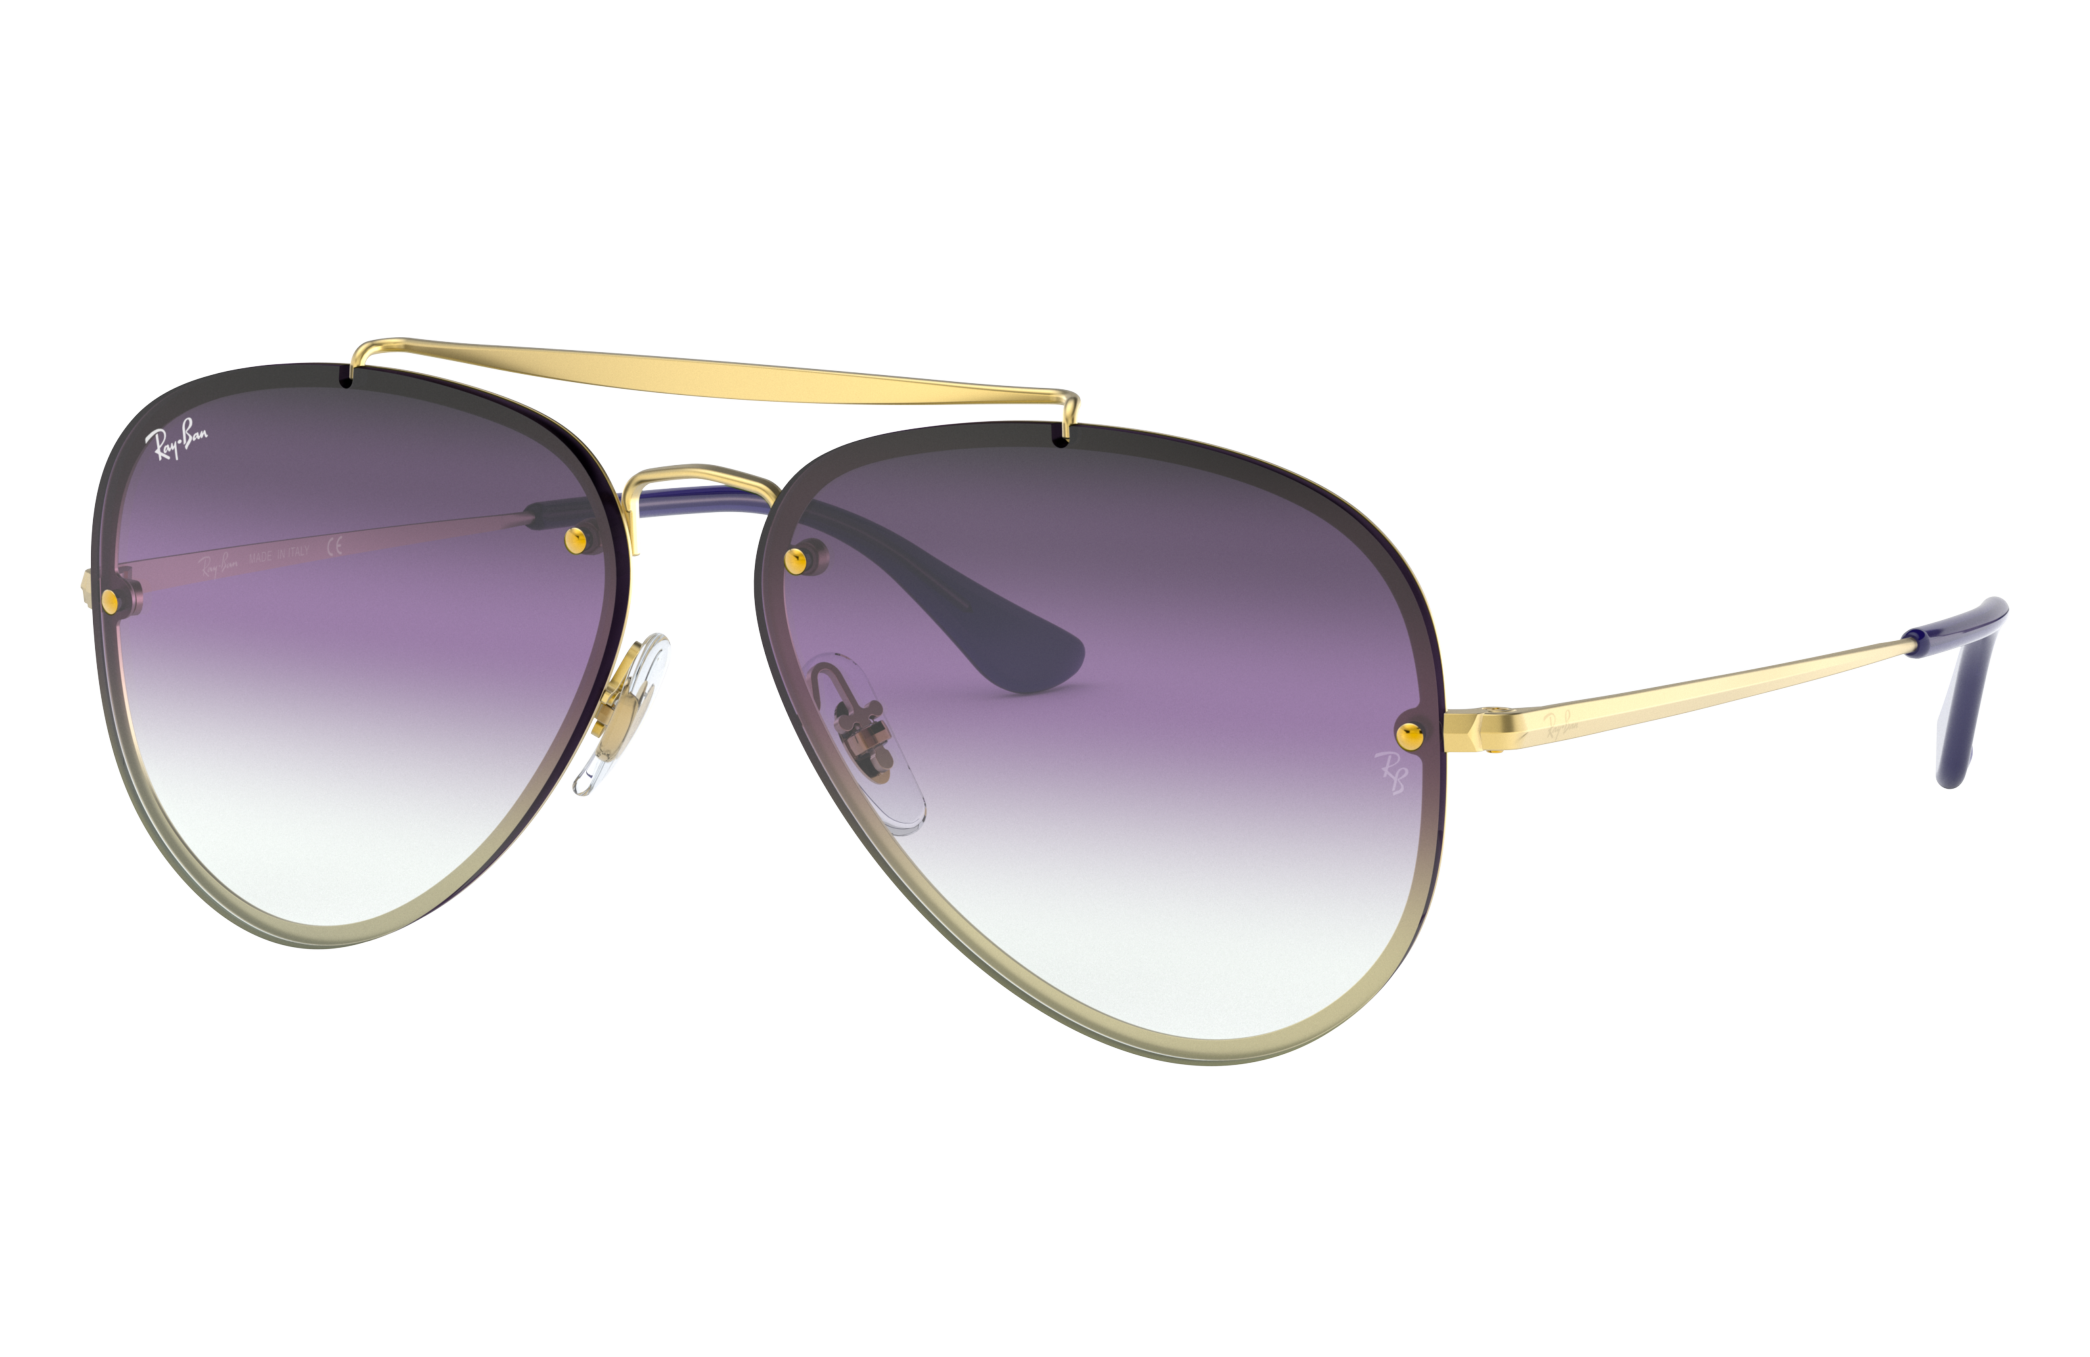 Blaze Aviator Sunglasses in Gold and Violet/Blue | Ray-Ban®